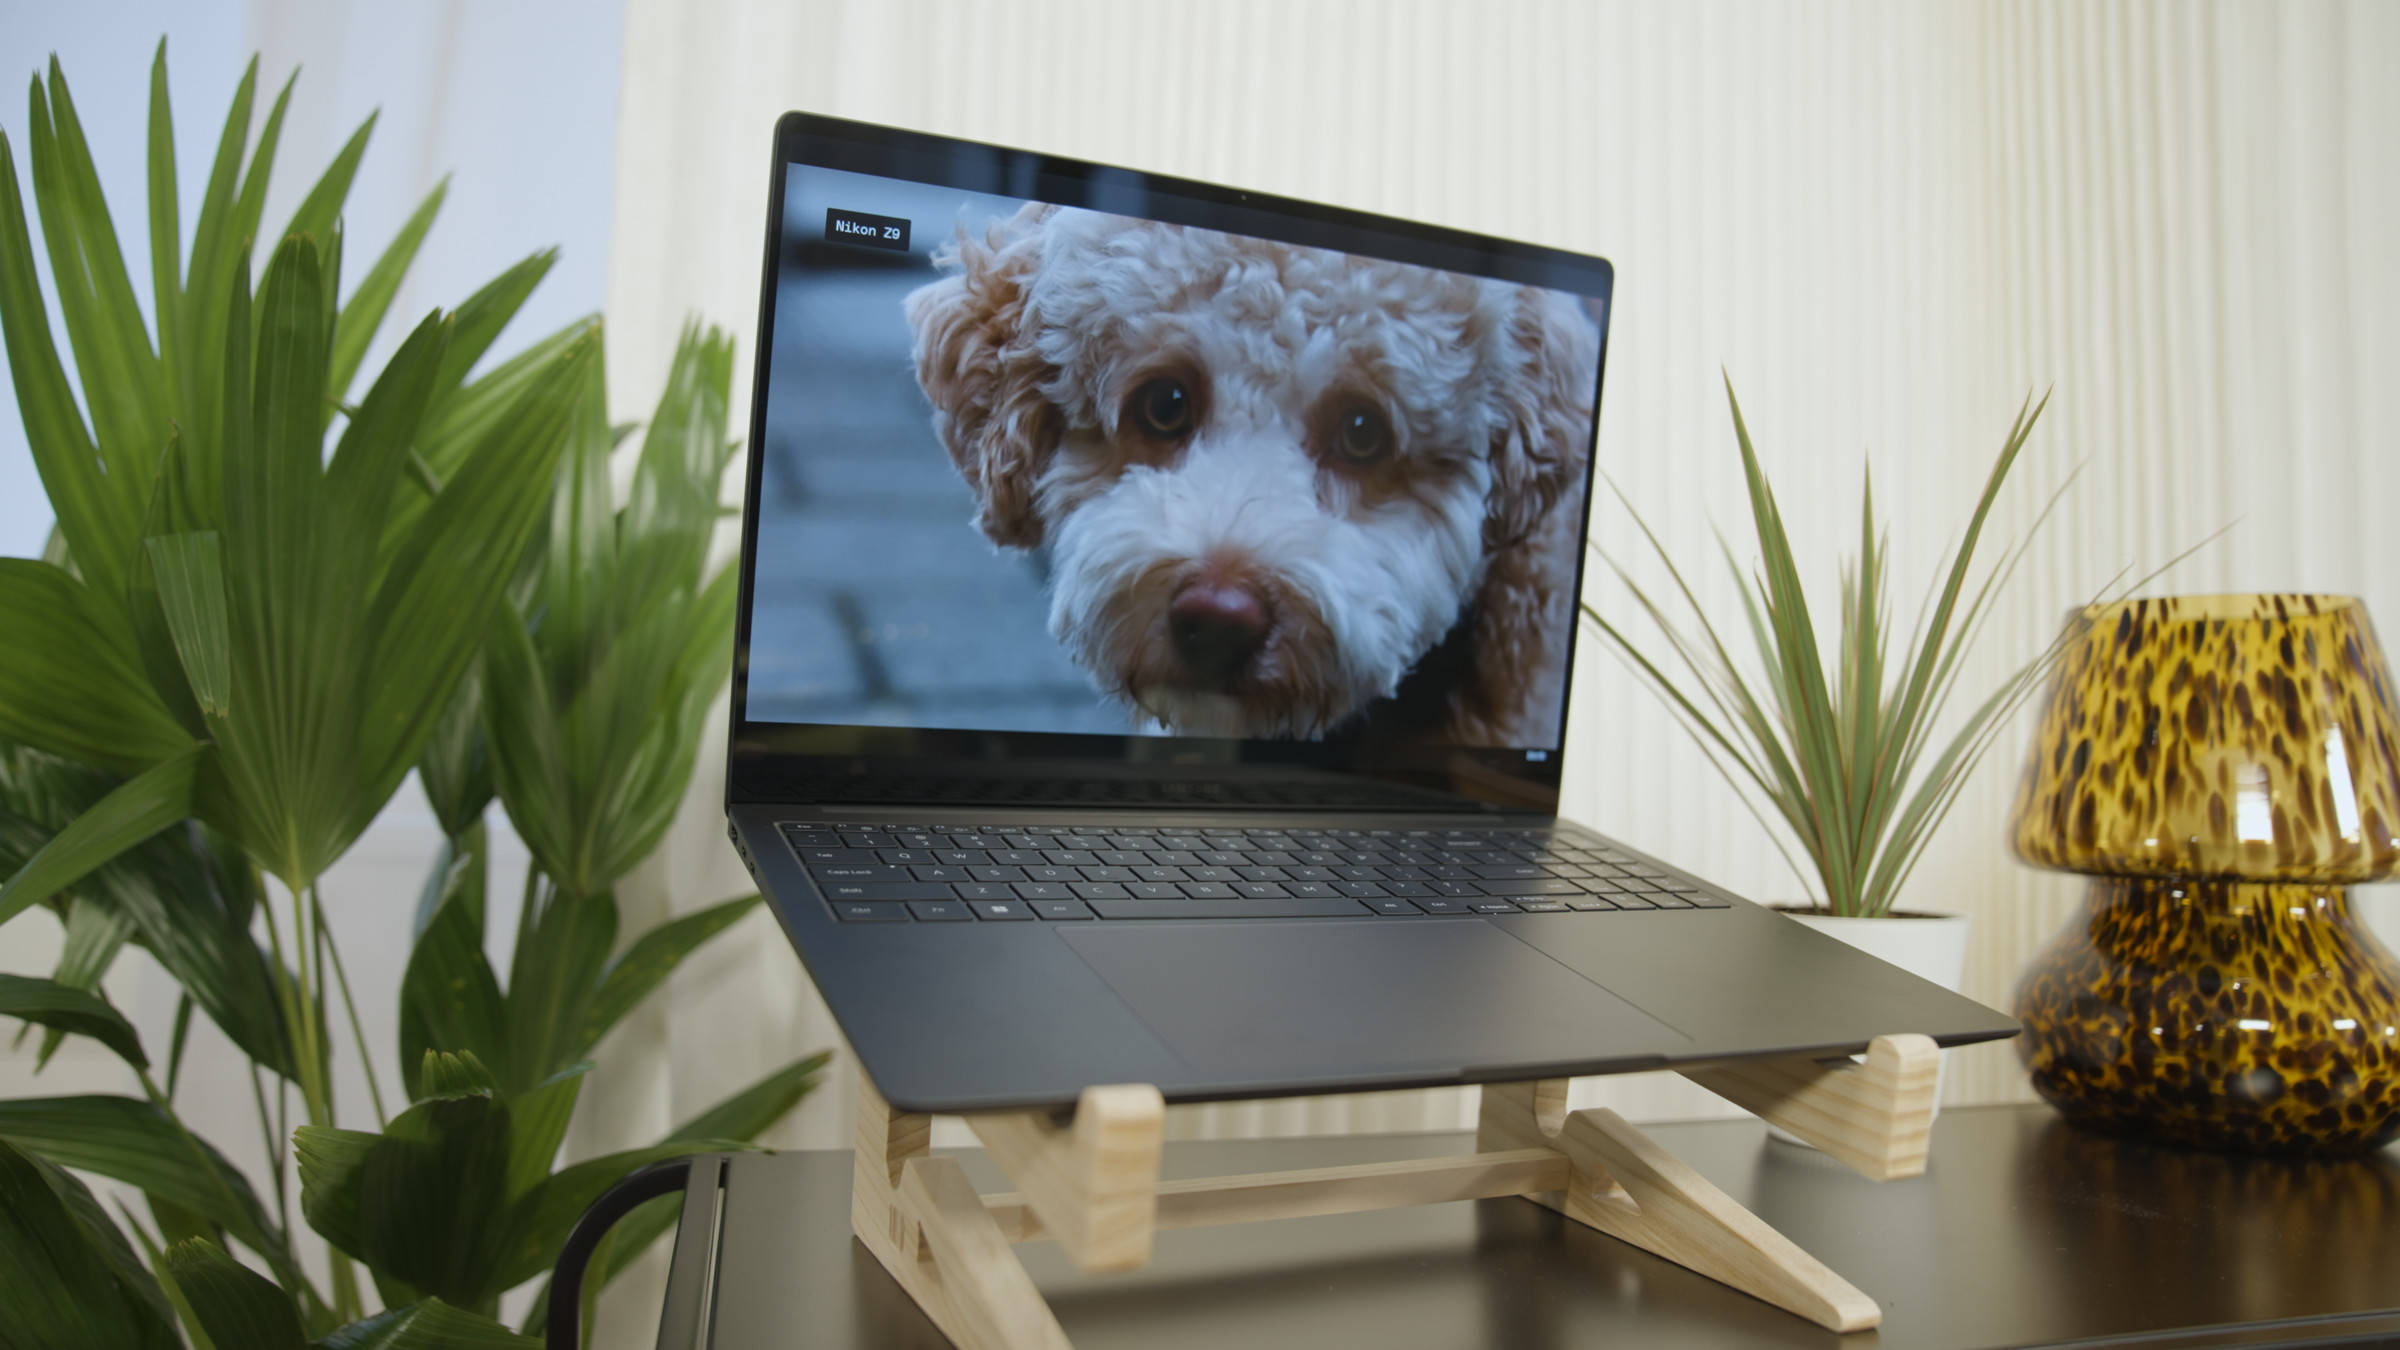 The Samsung Galaxy Book3 Ultra with a houseplant on either side. The screen displays a picture of a dog’s face.